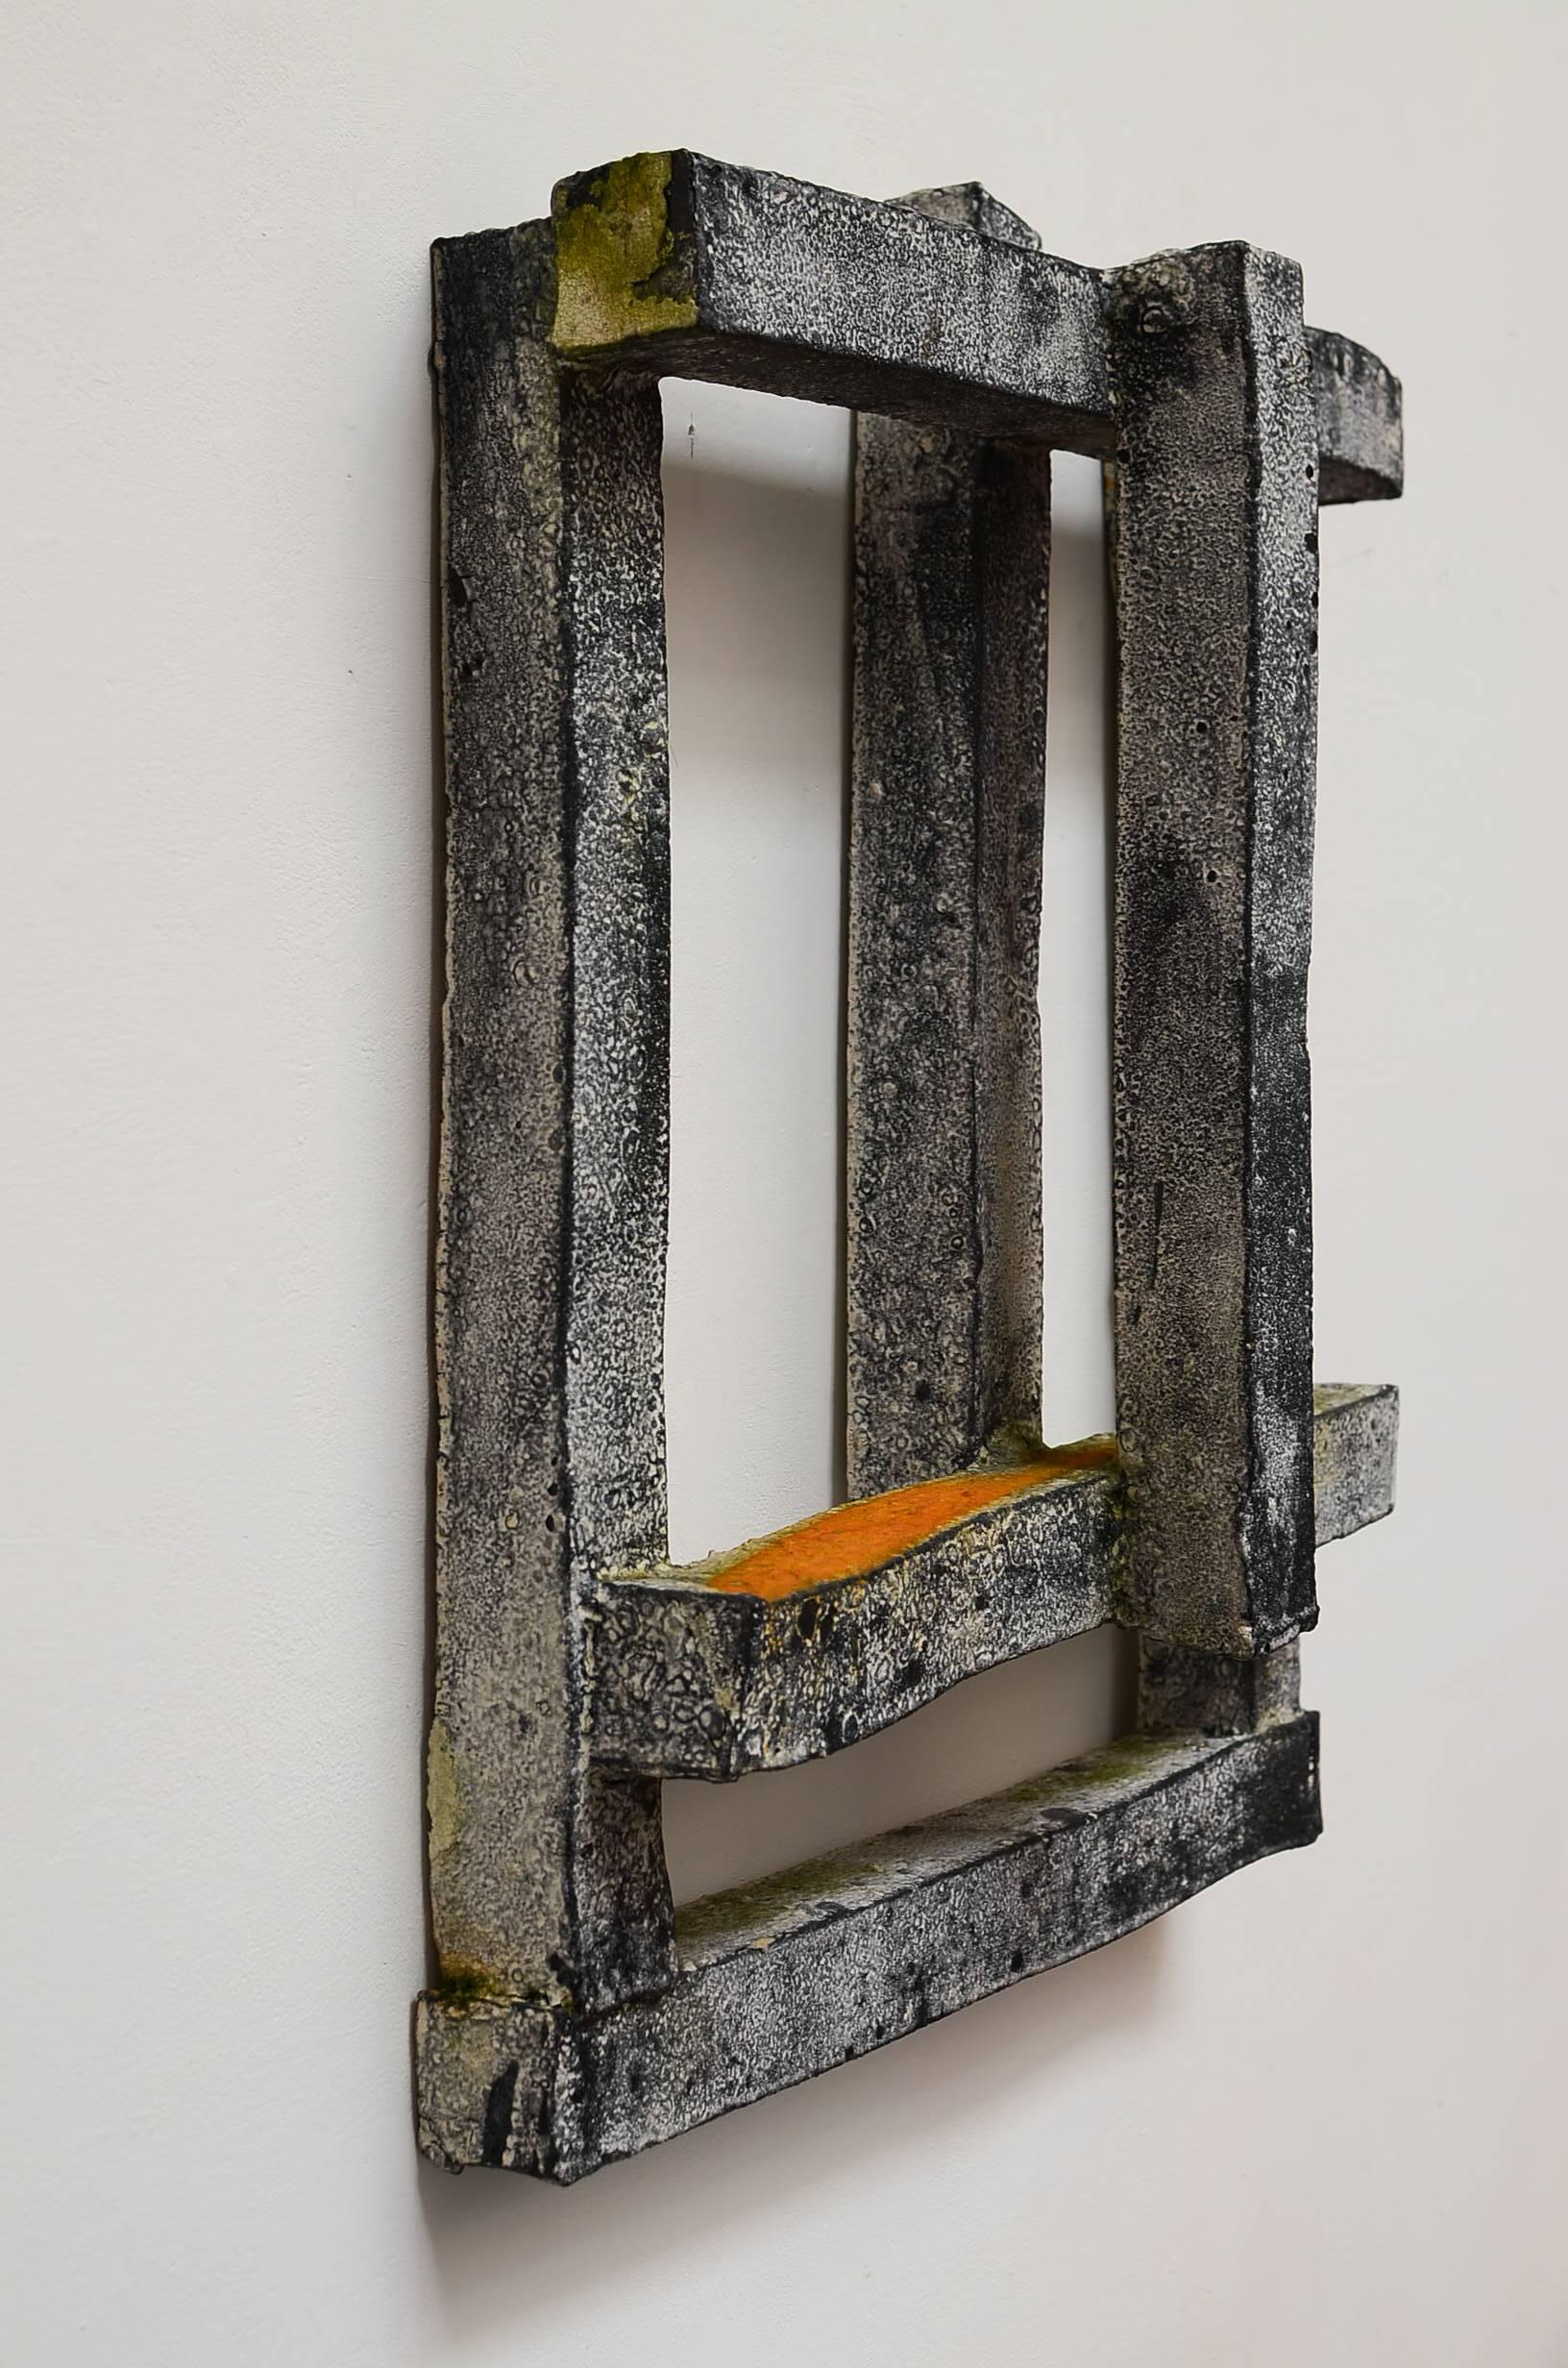 Robert Brady Untitled #56 Ceramic Wall Sculpture, 2005 In Excellent Condition For Sale In San Francisco, CA